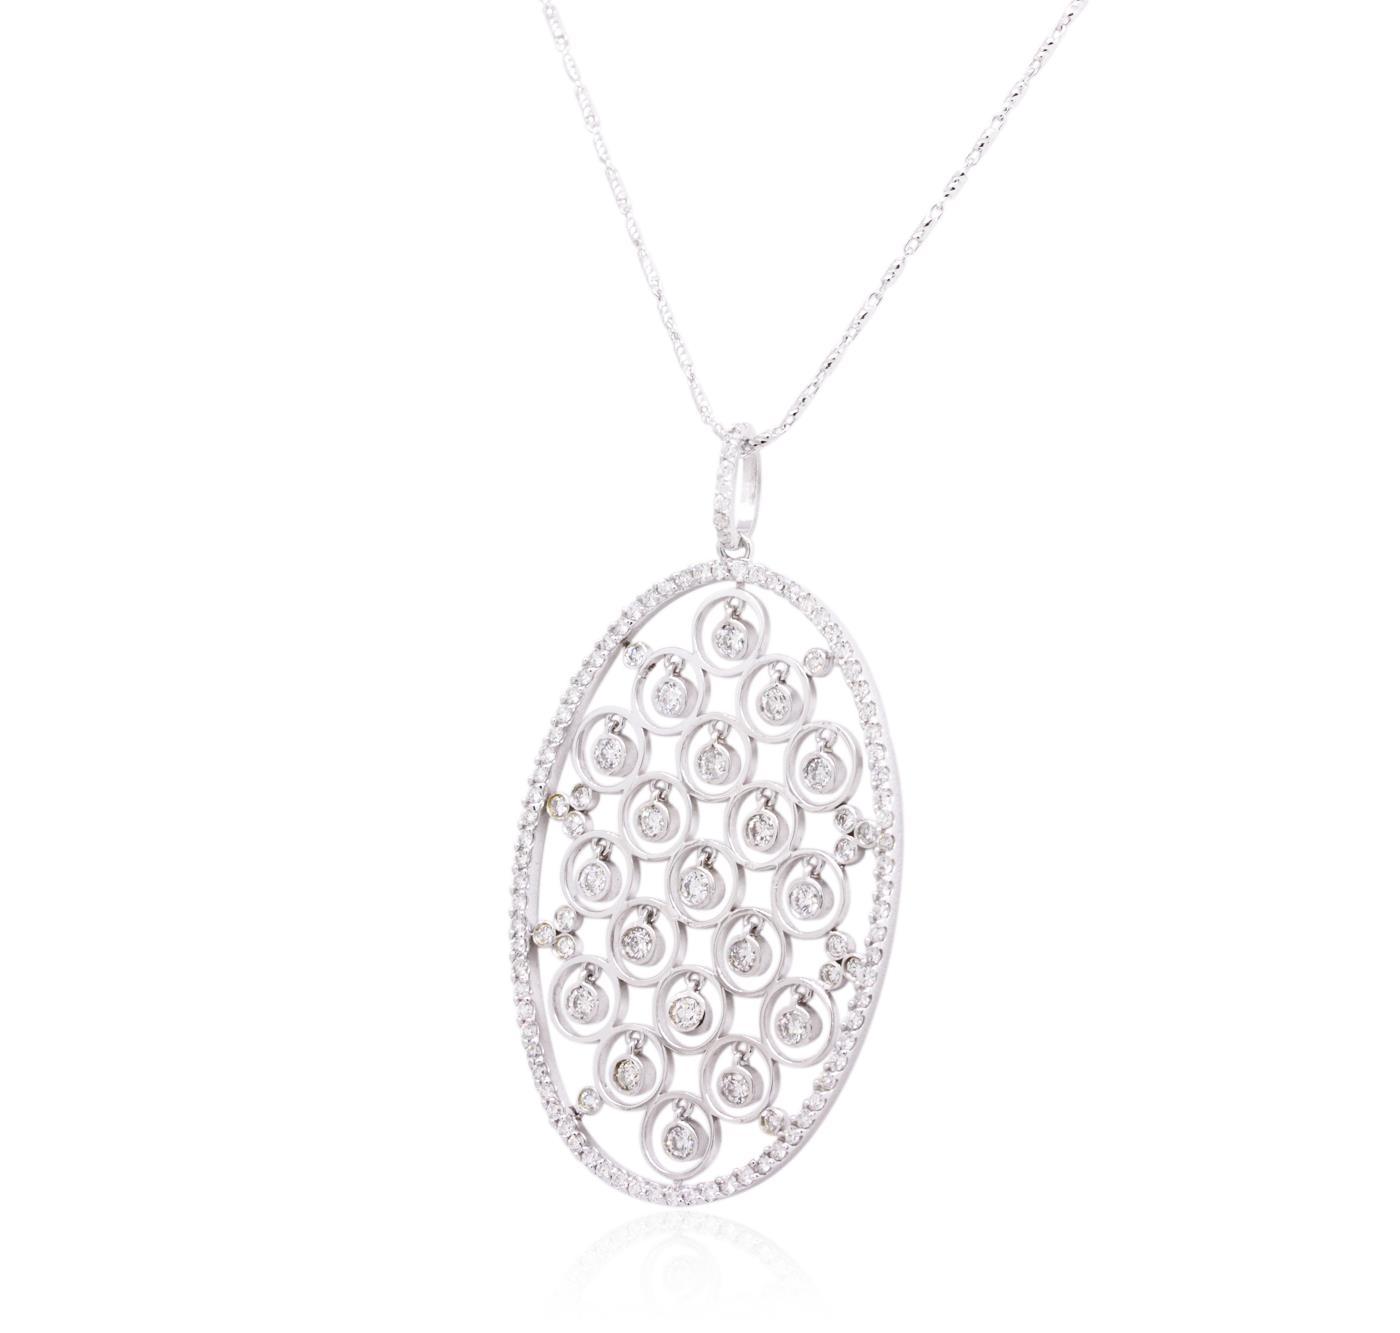 14KT White Gold 1.47 ctw Diamond Pendant With Chain